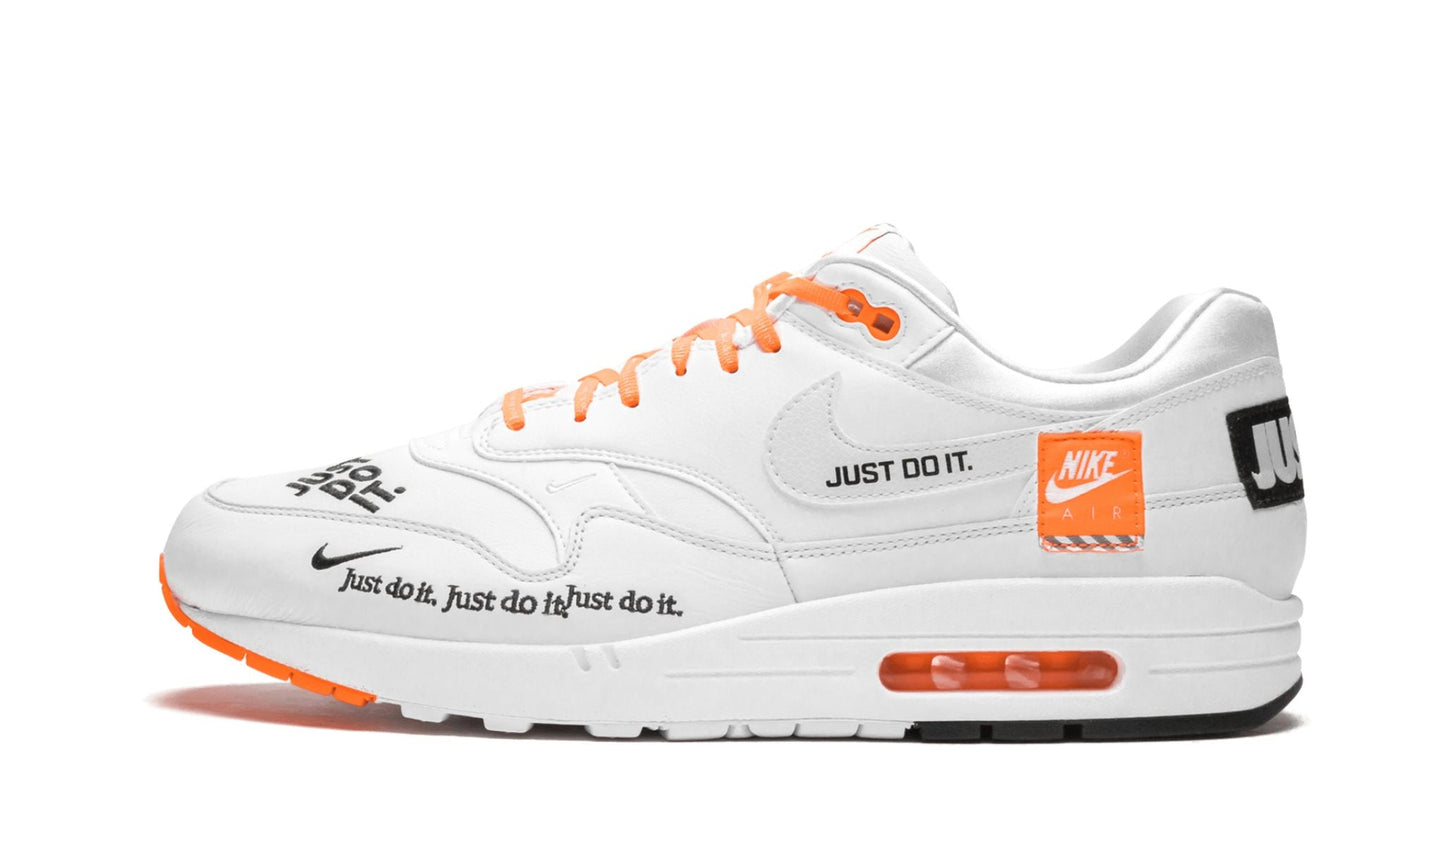 Air Max 1 SE "Just Do It"